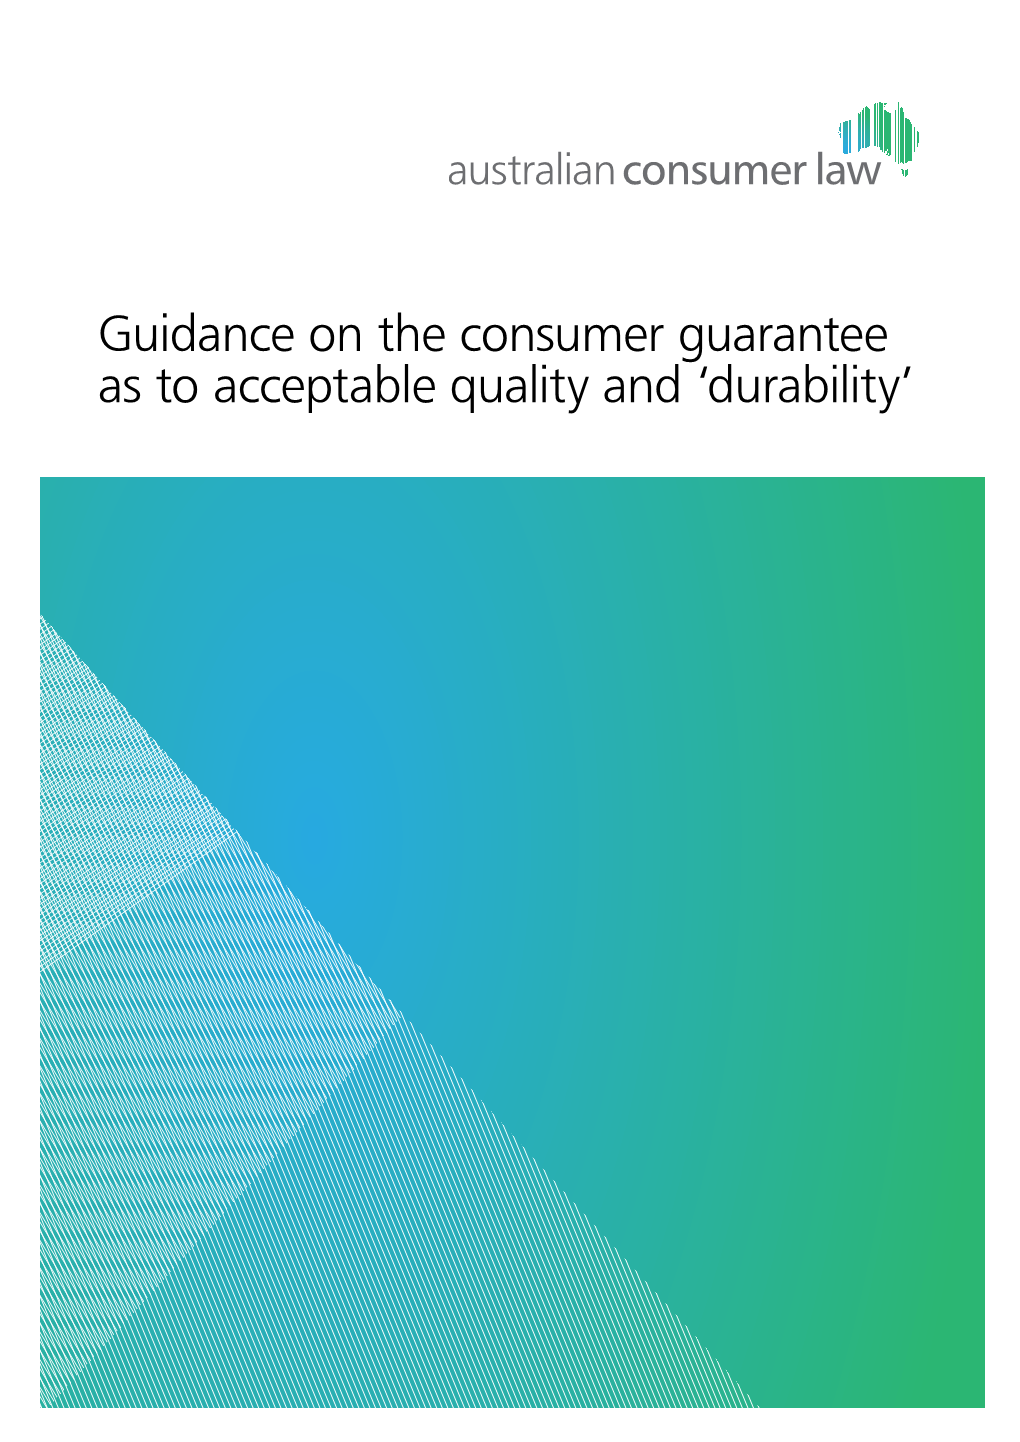 Guidance on the Consumer Guarantee As To